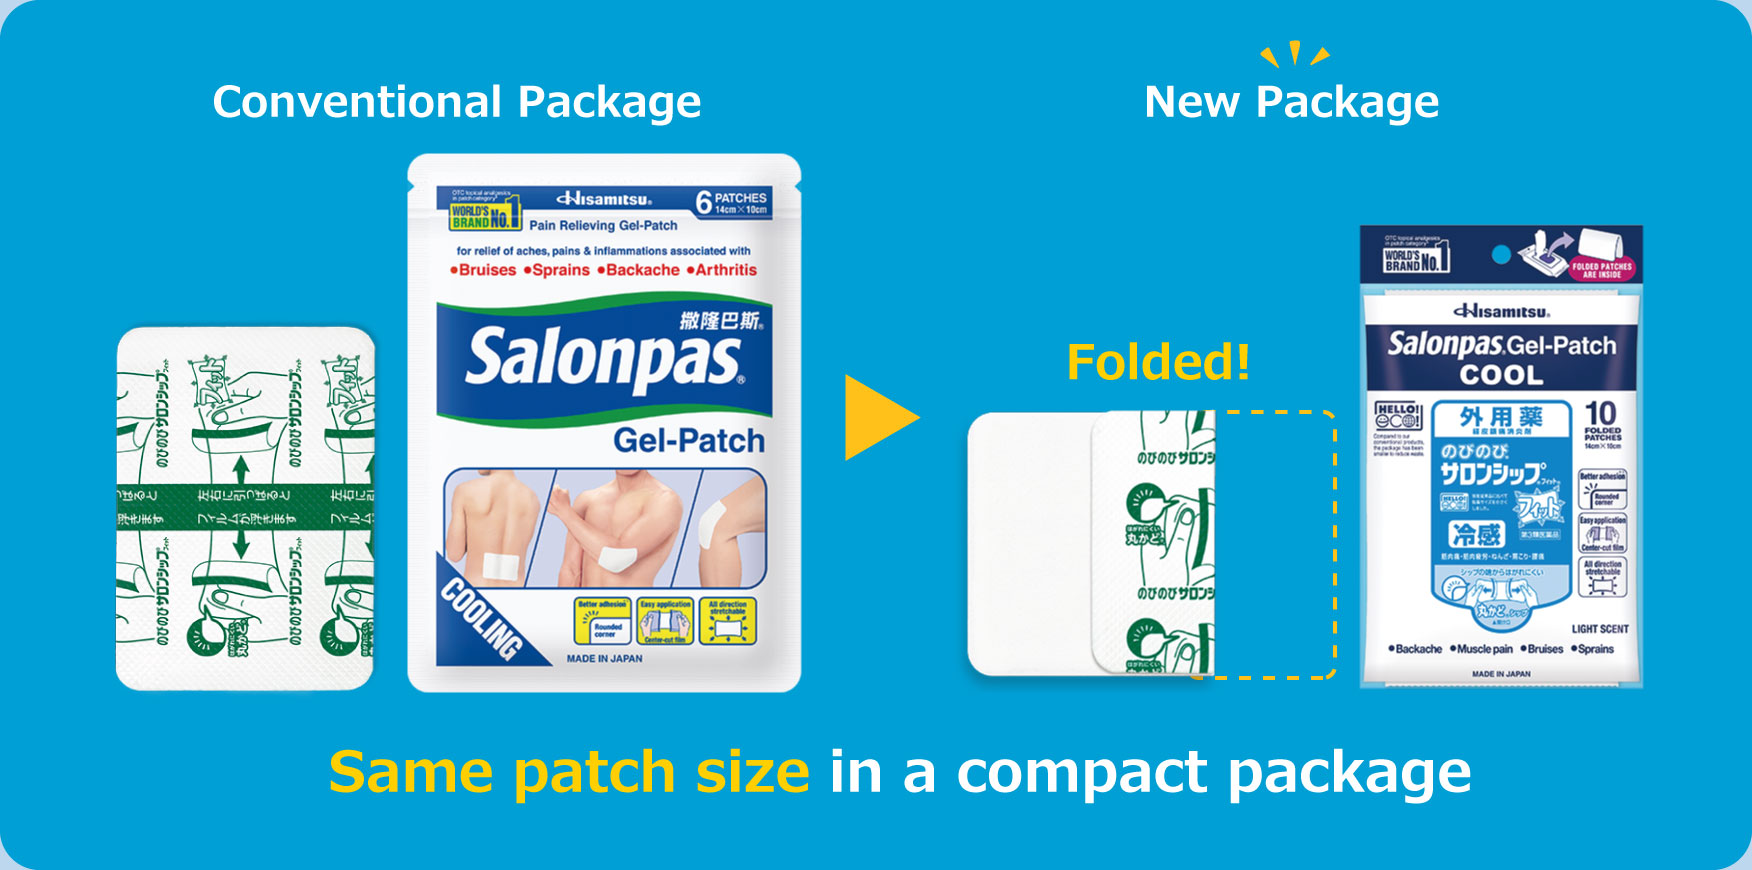 Same patch size, in a compact package